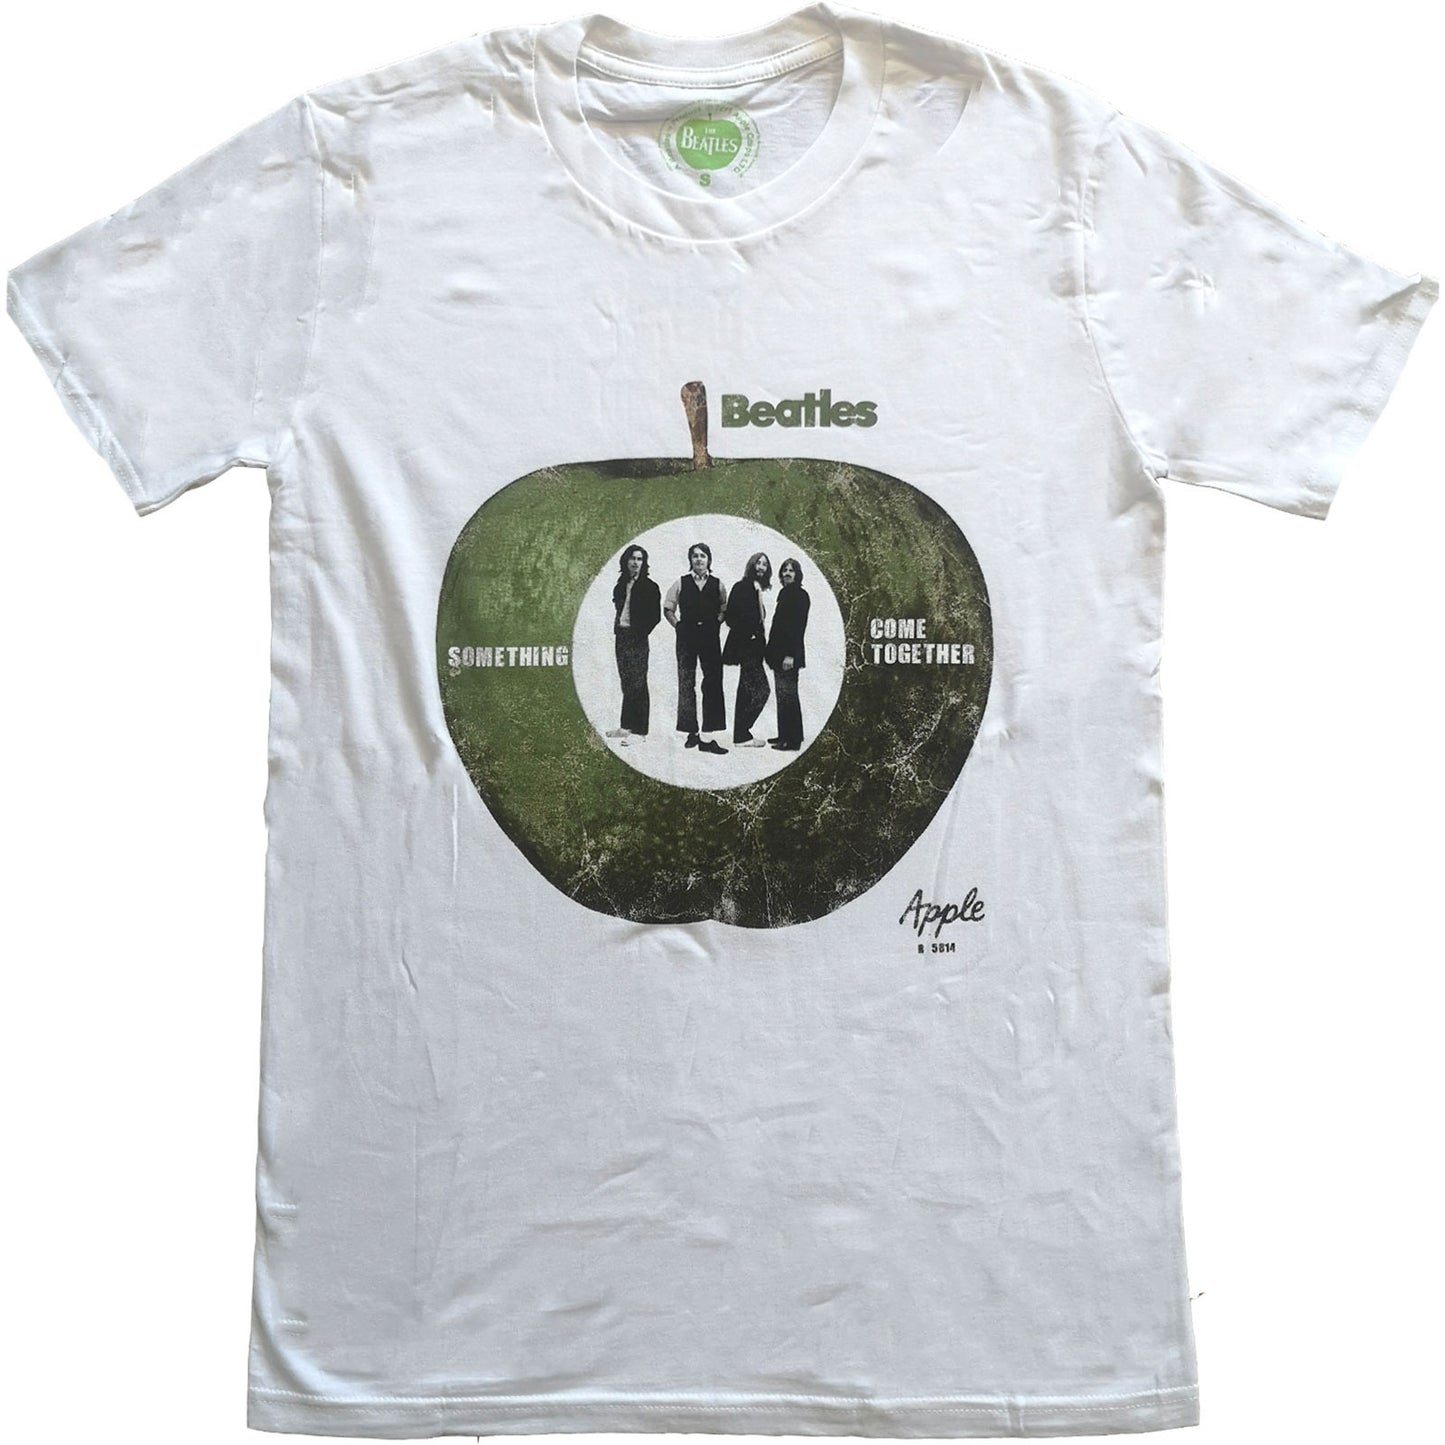 The Beatles Unisex T-Shirt: Something/Come Together